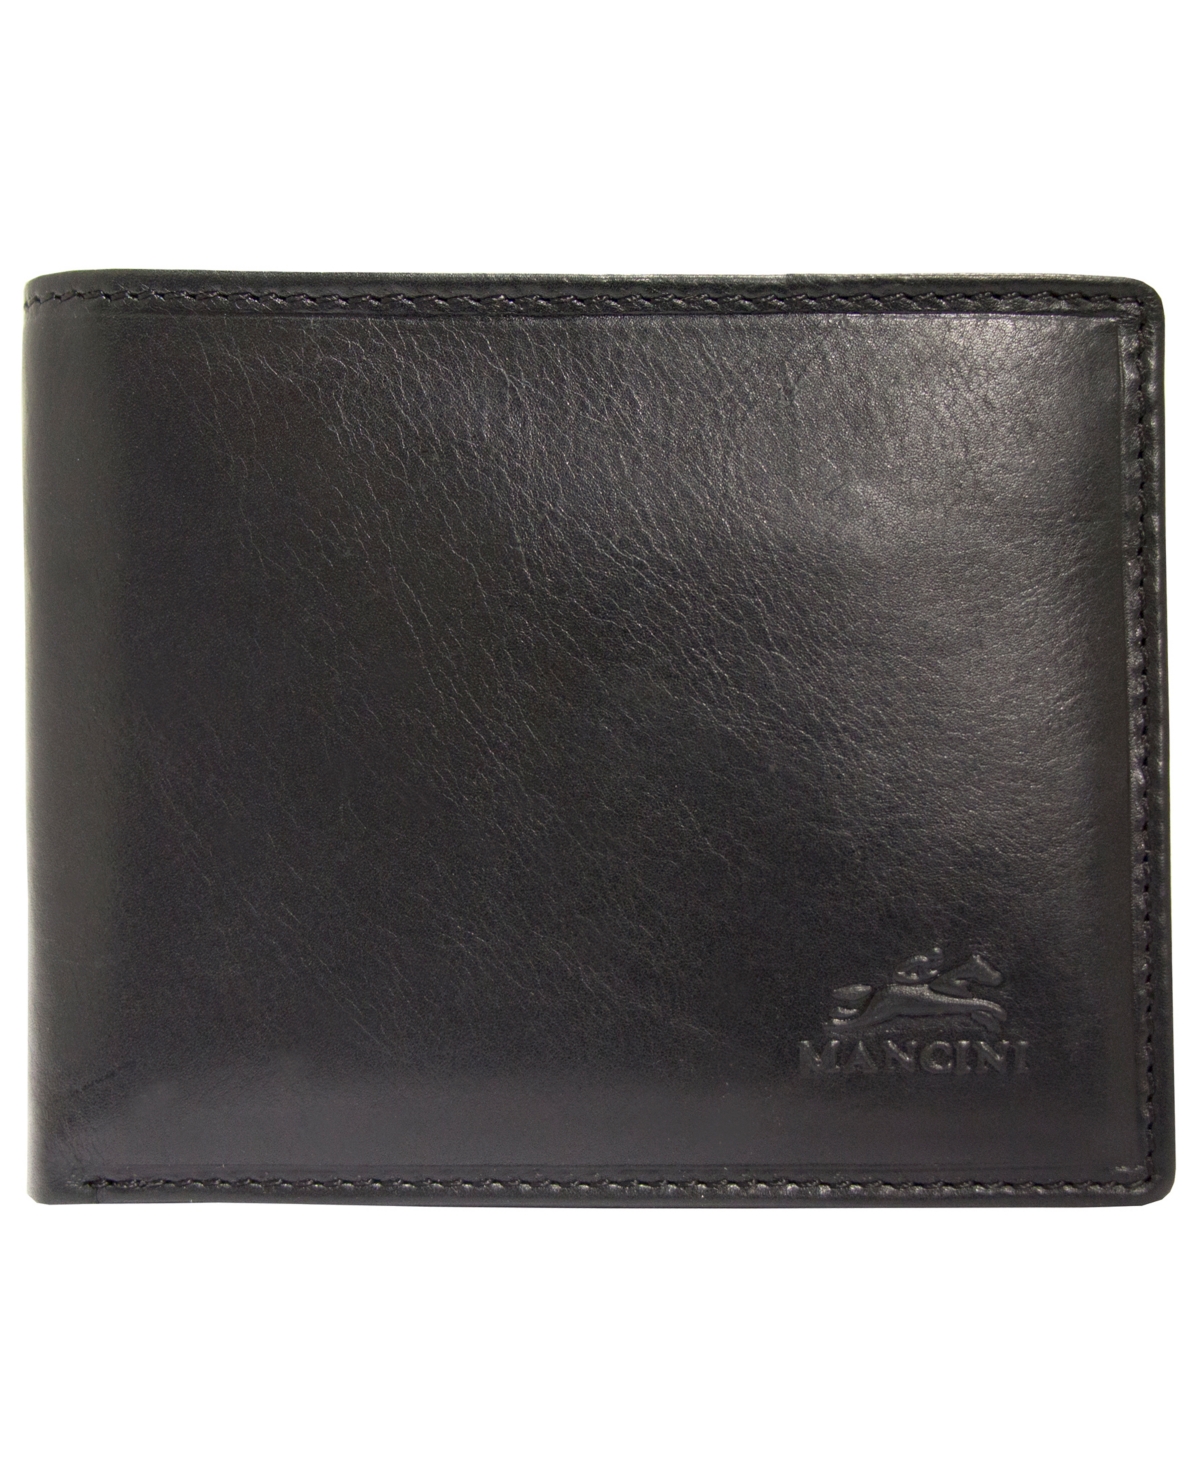 Mancini Men's Mancini Boulder Collection Rfid Secure Wallet with Removable Passcase and Coin Pocket